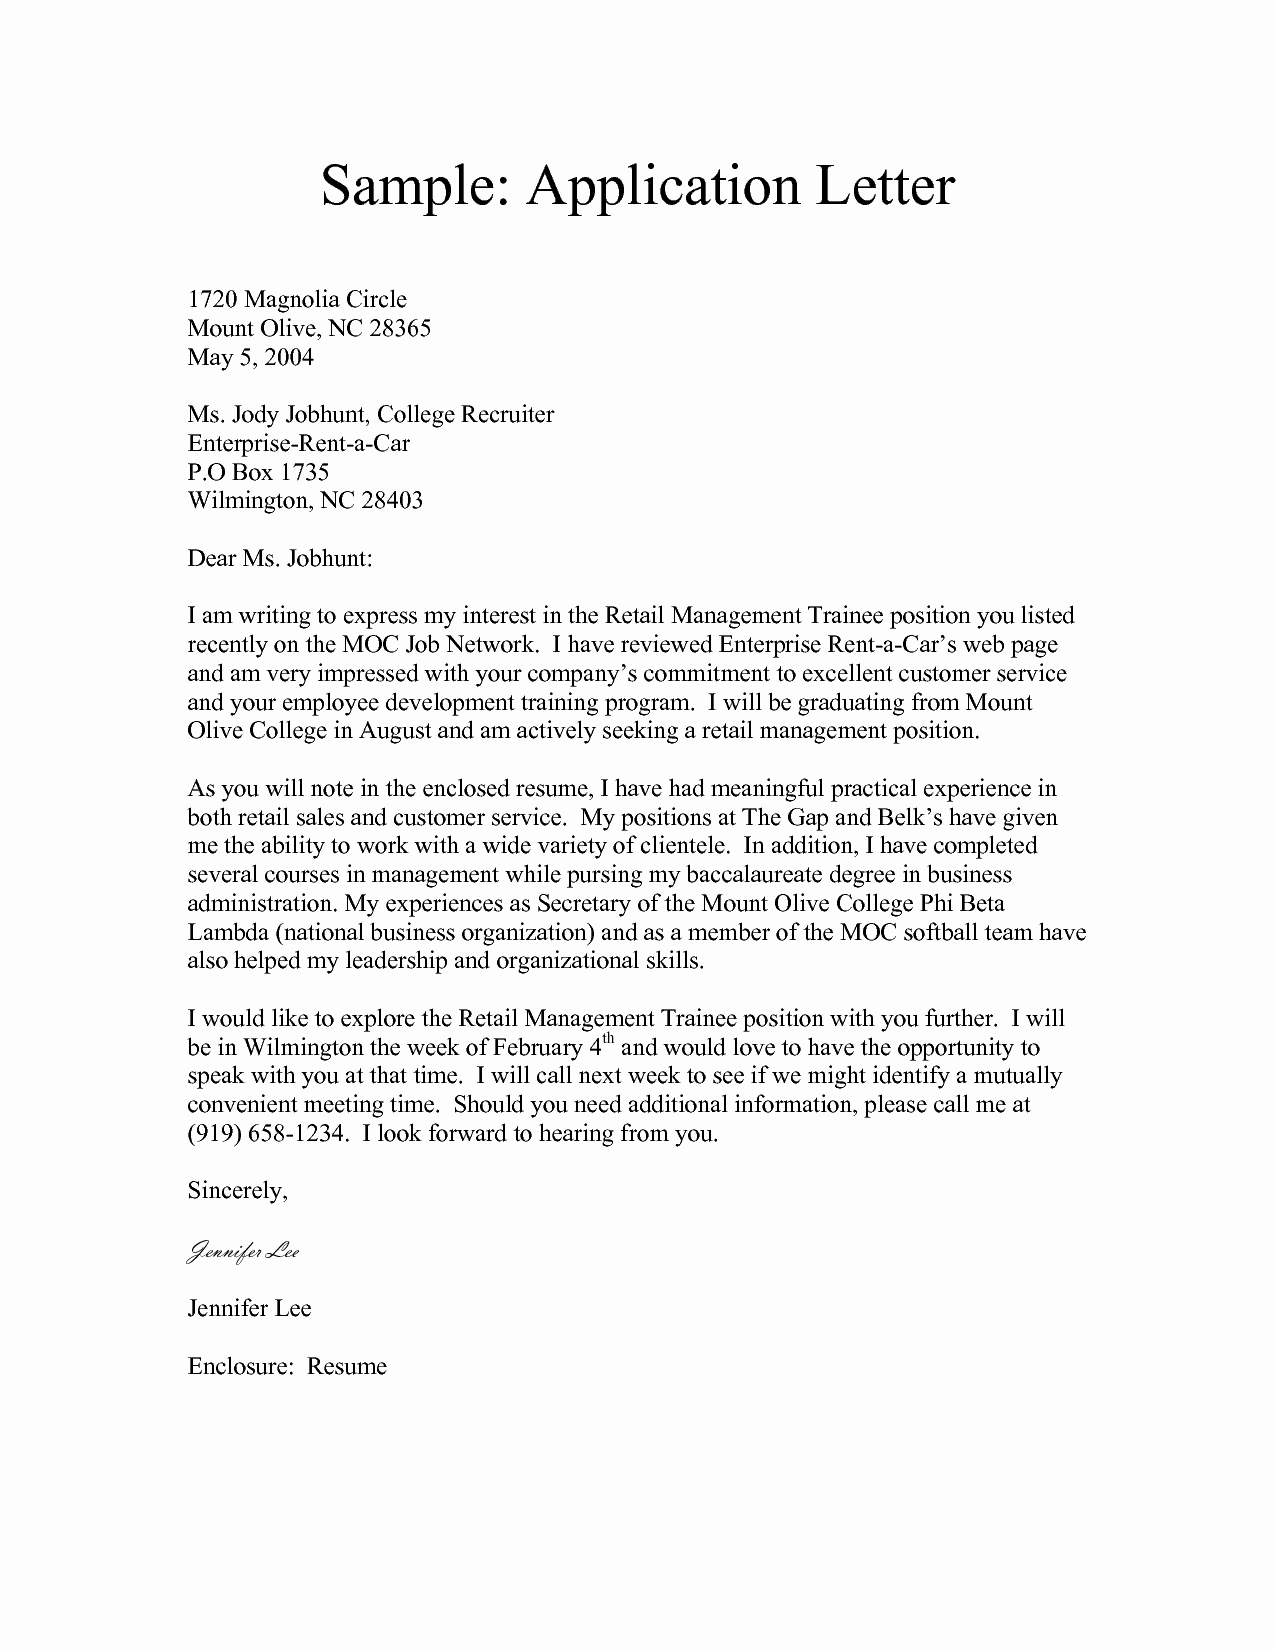 Letters Of Application Examples Luxury Download Free Application Letters